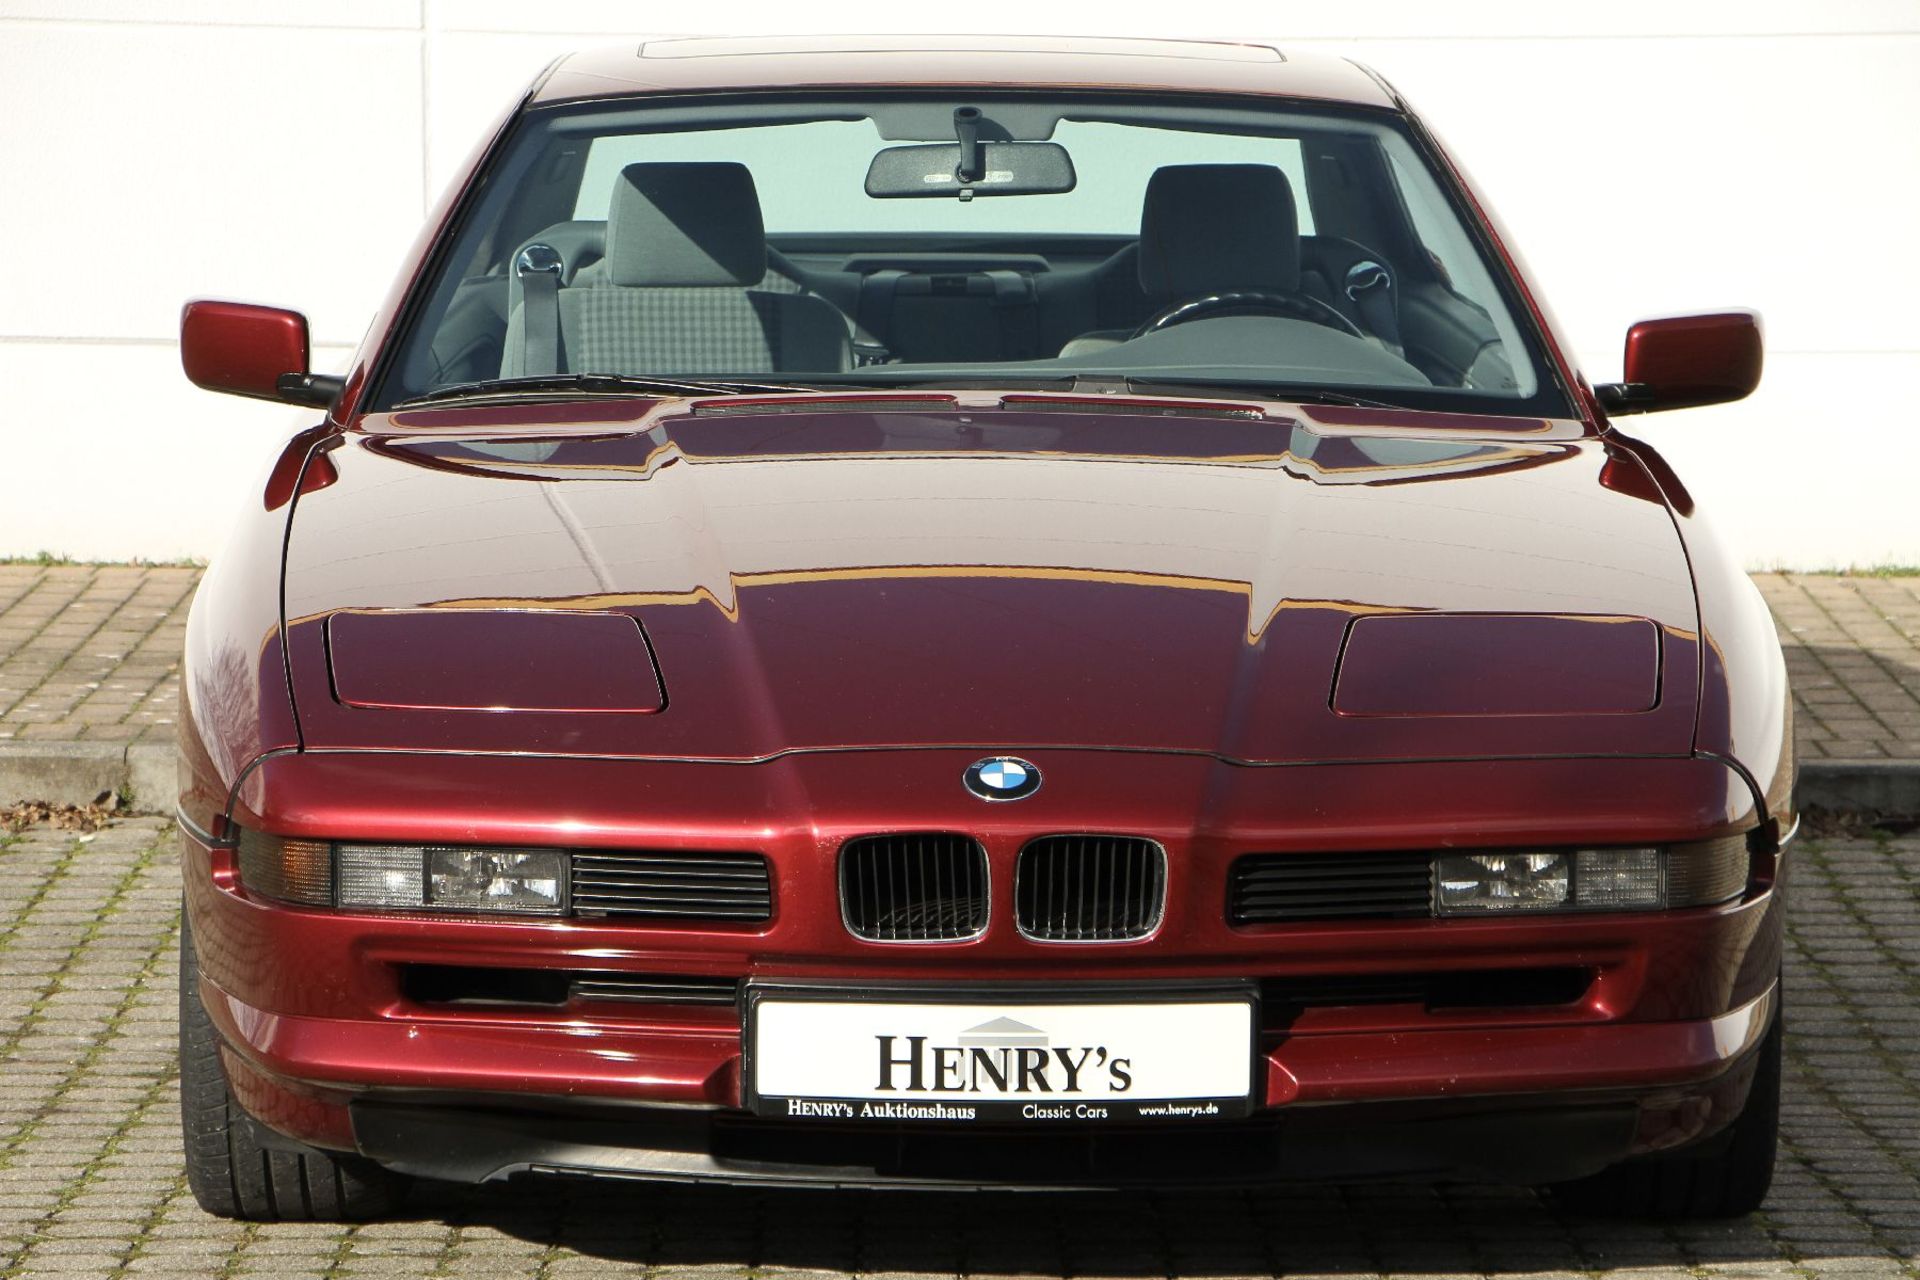 BMW 850i Coupé, Chassis Number:WBAEG21020CB10493, first registered 05/1992, german collector car - Bild 3 aus 19